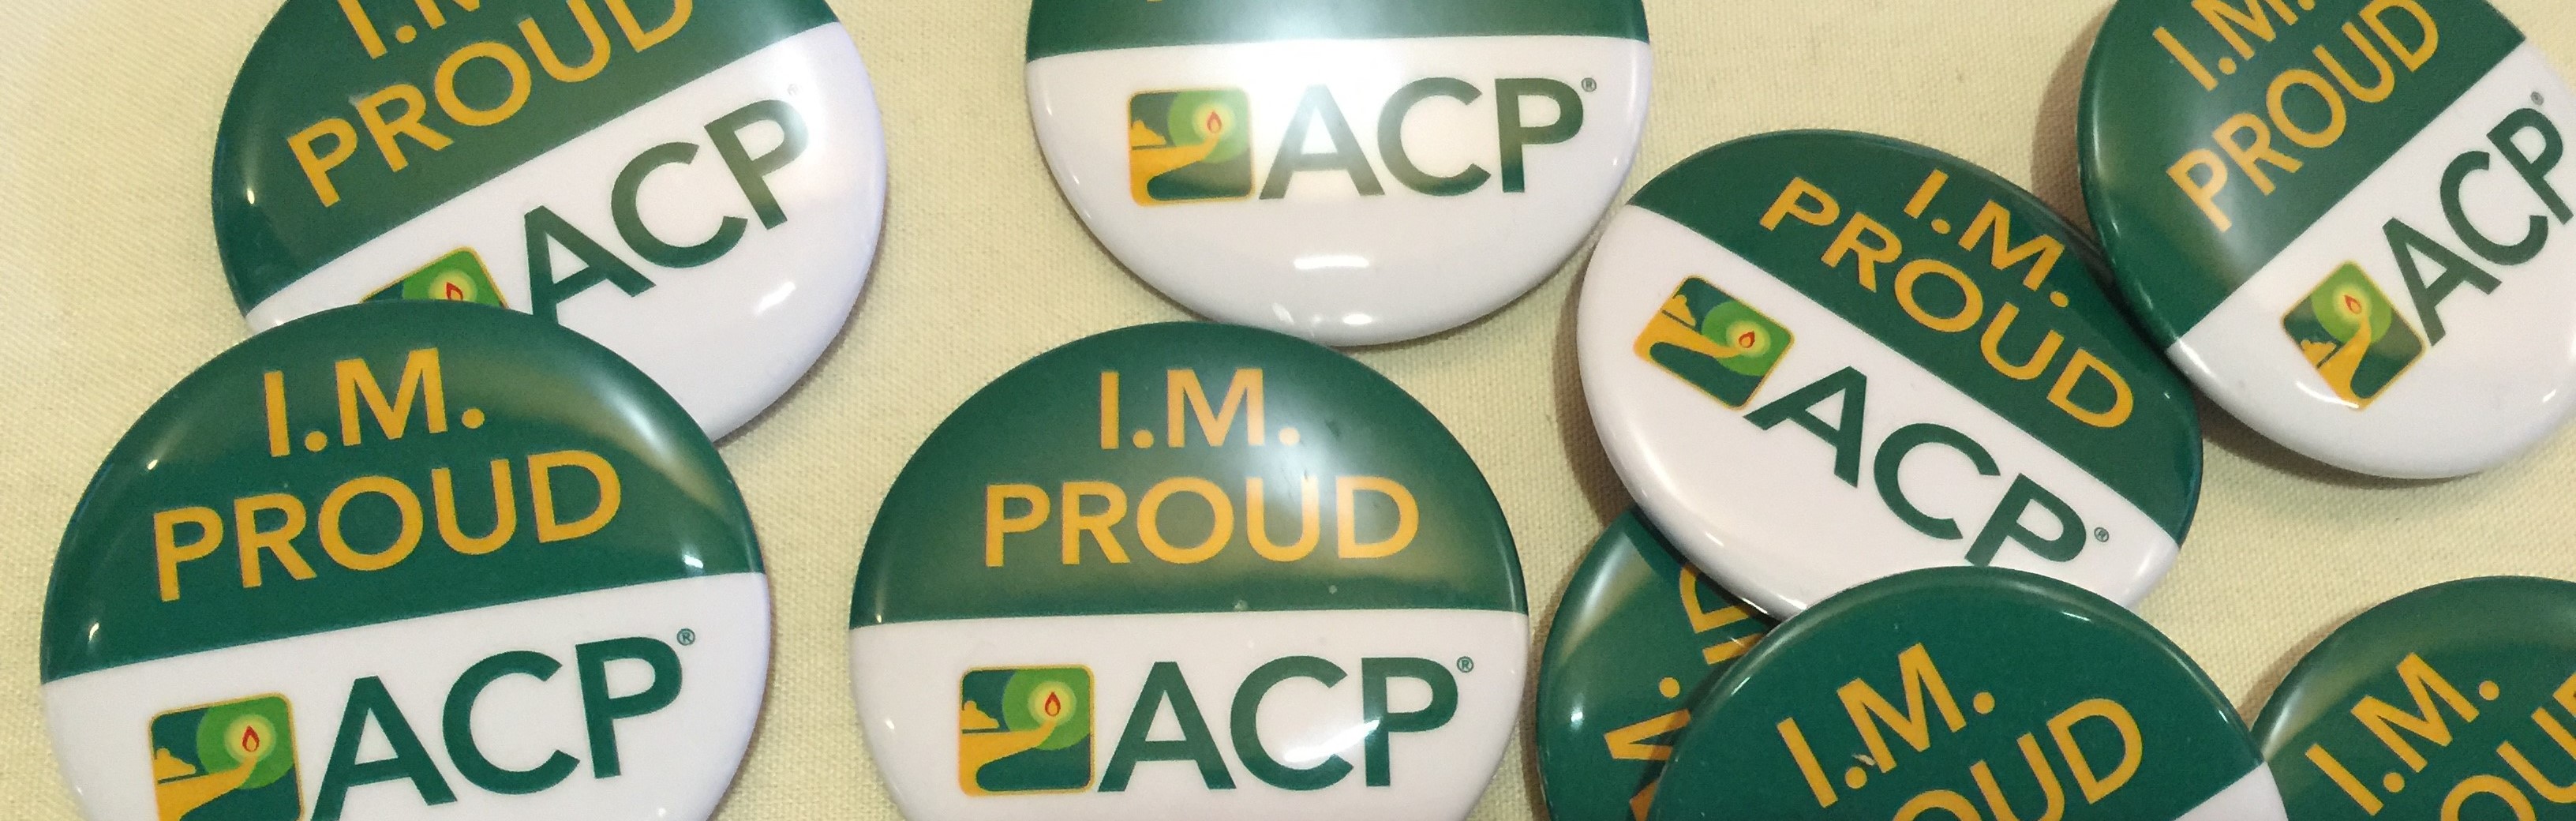 I.M. Proud ACP buttons